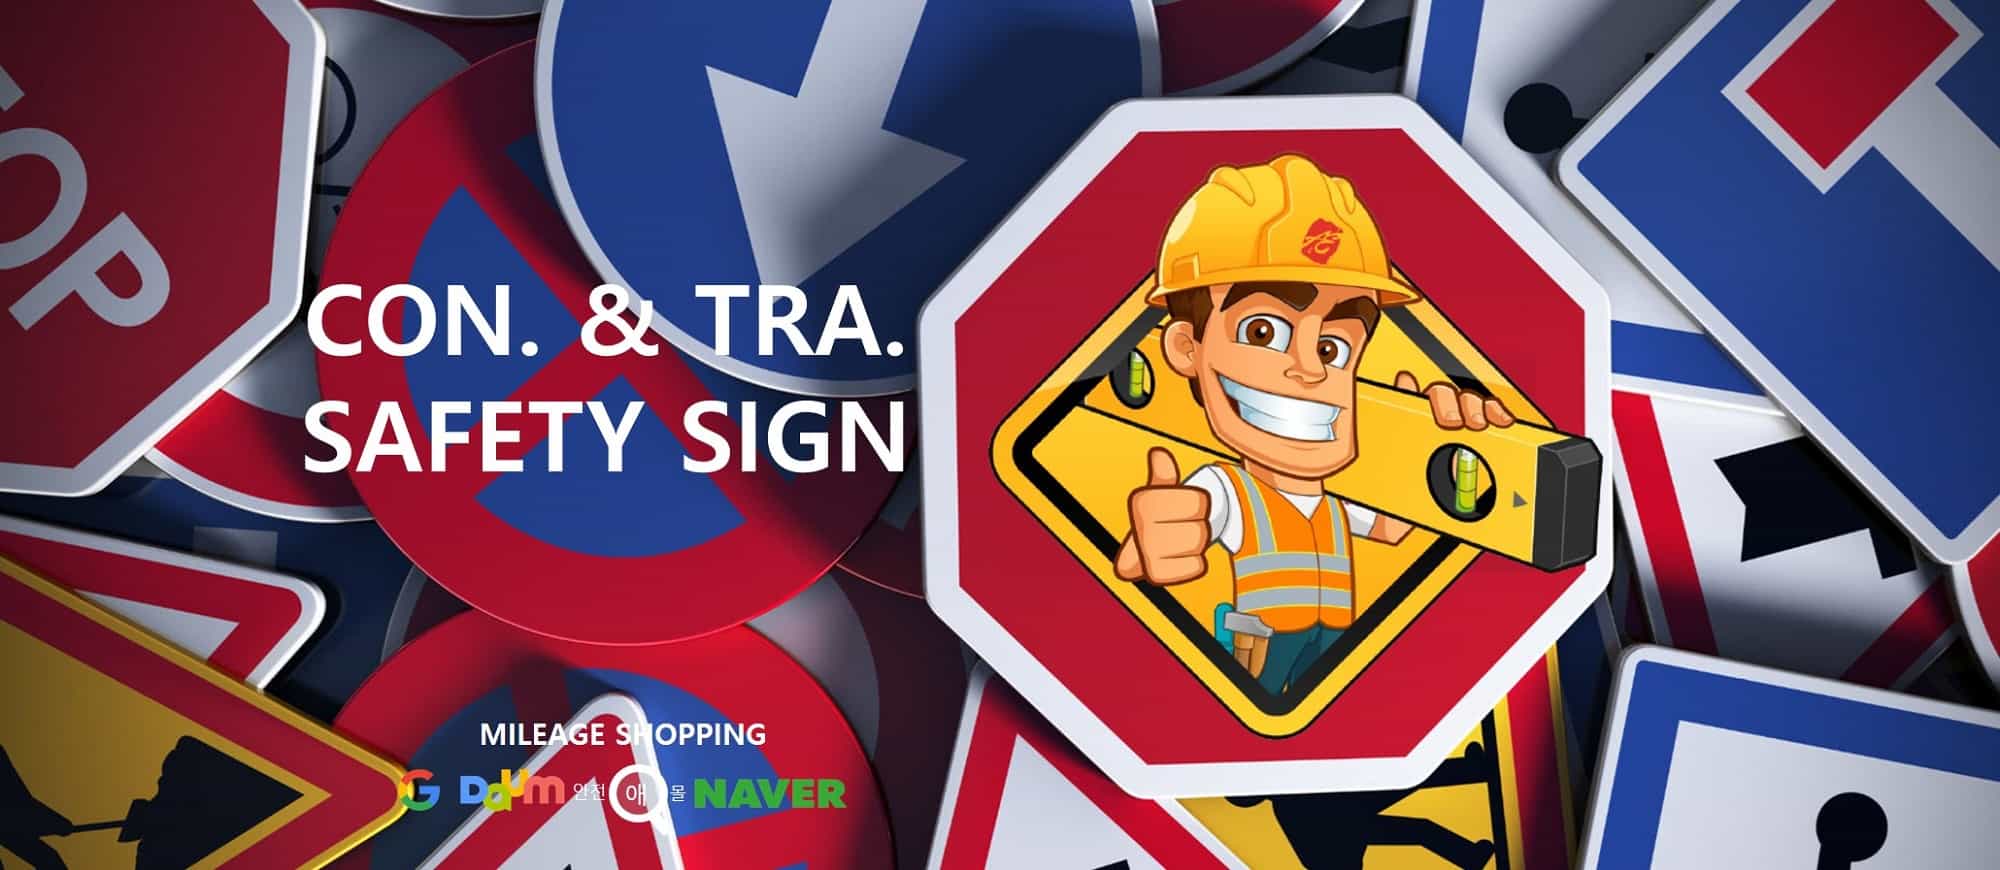 CON. & TRA. SAFETY SIGN